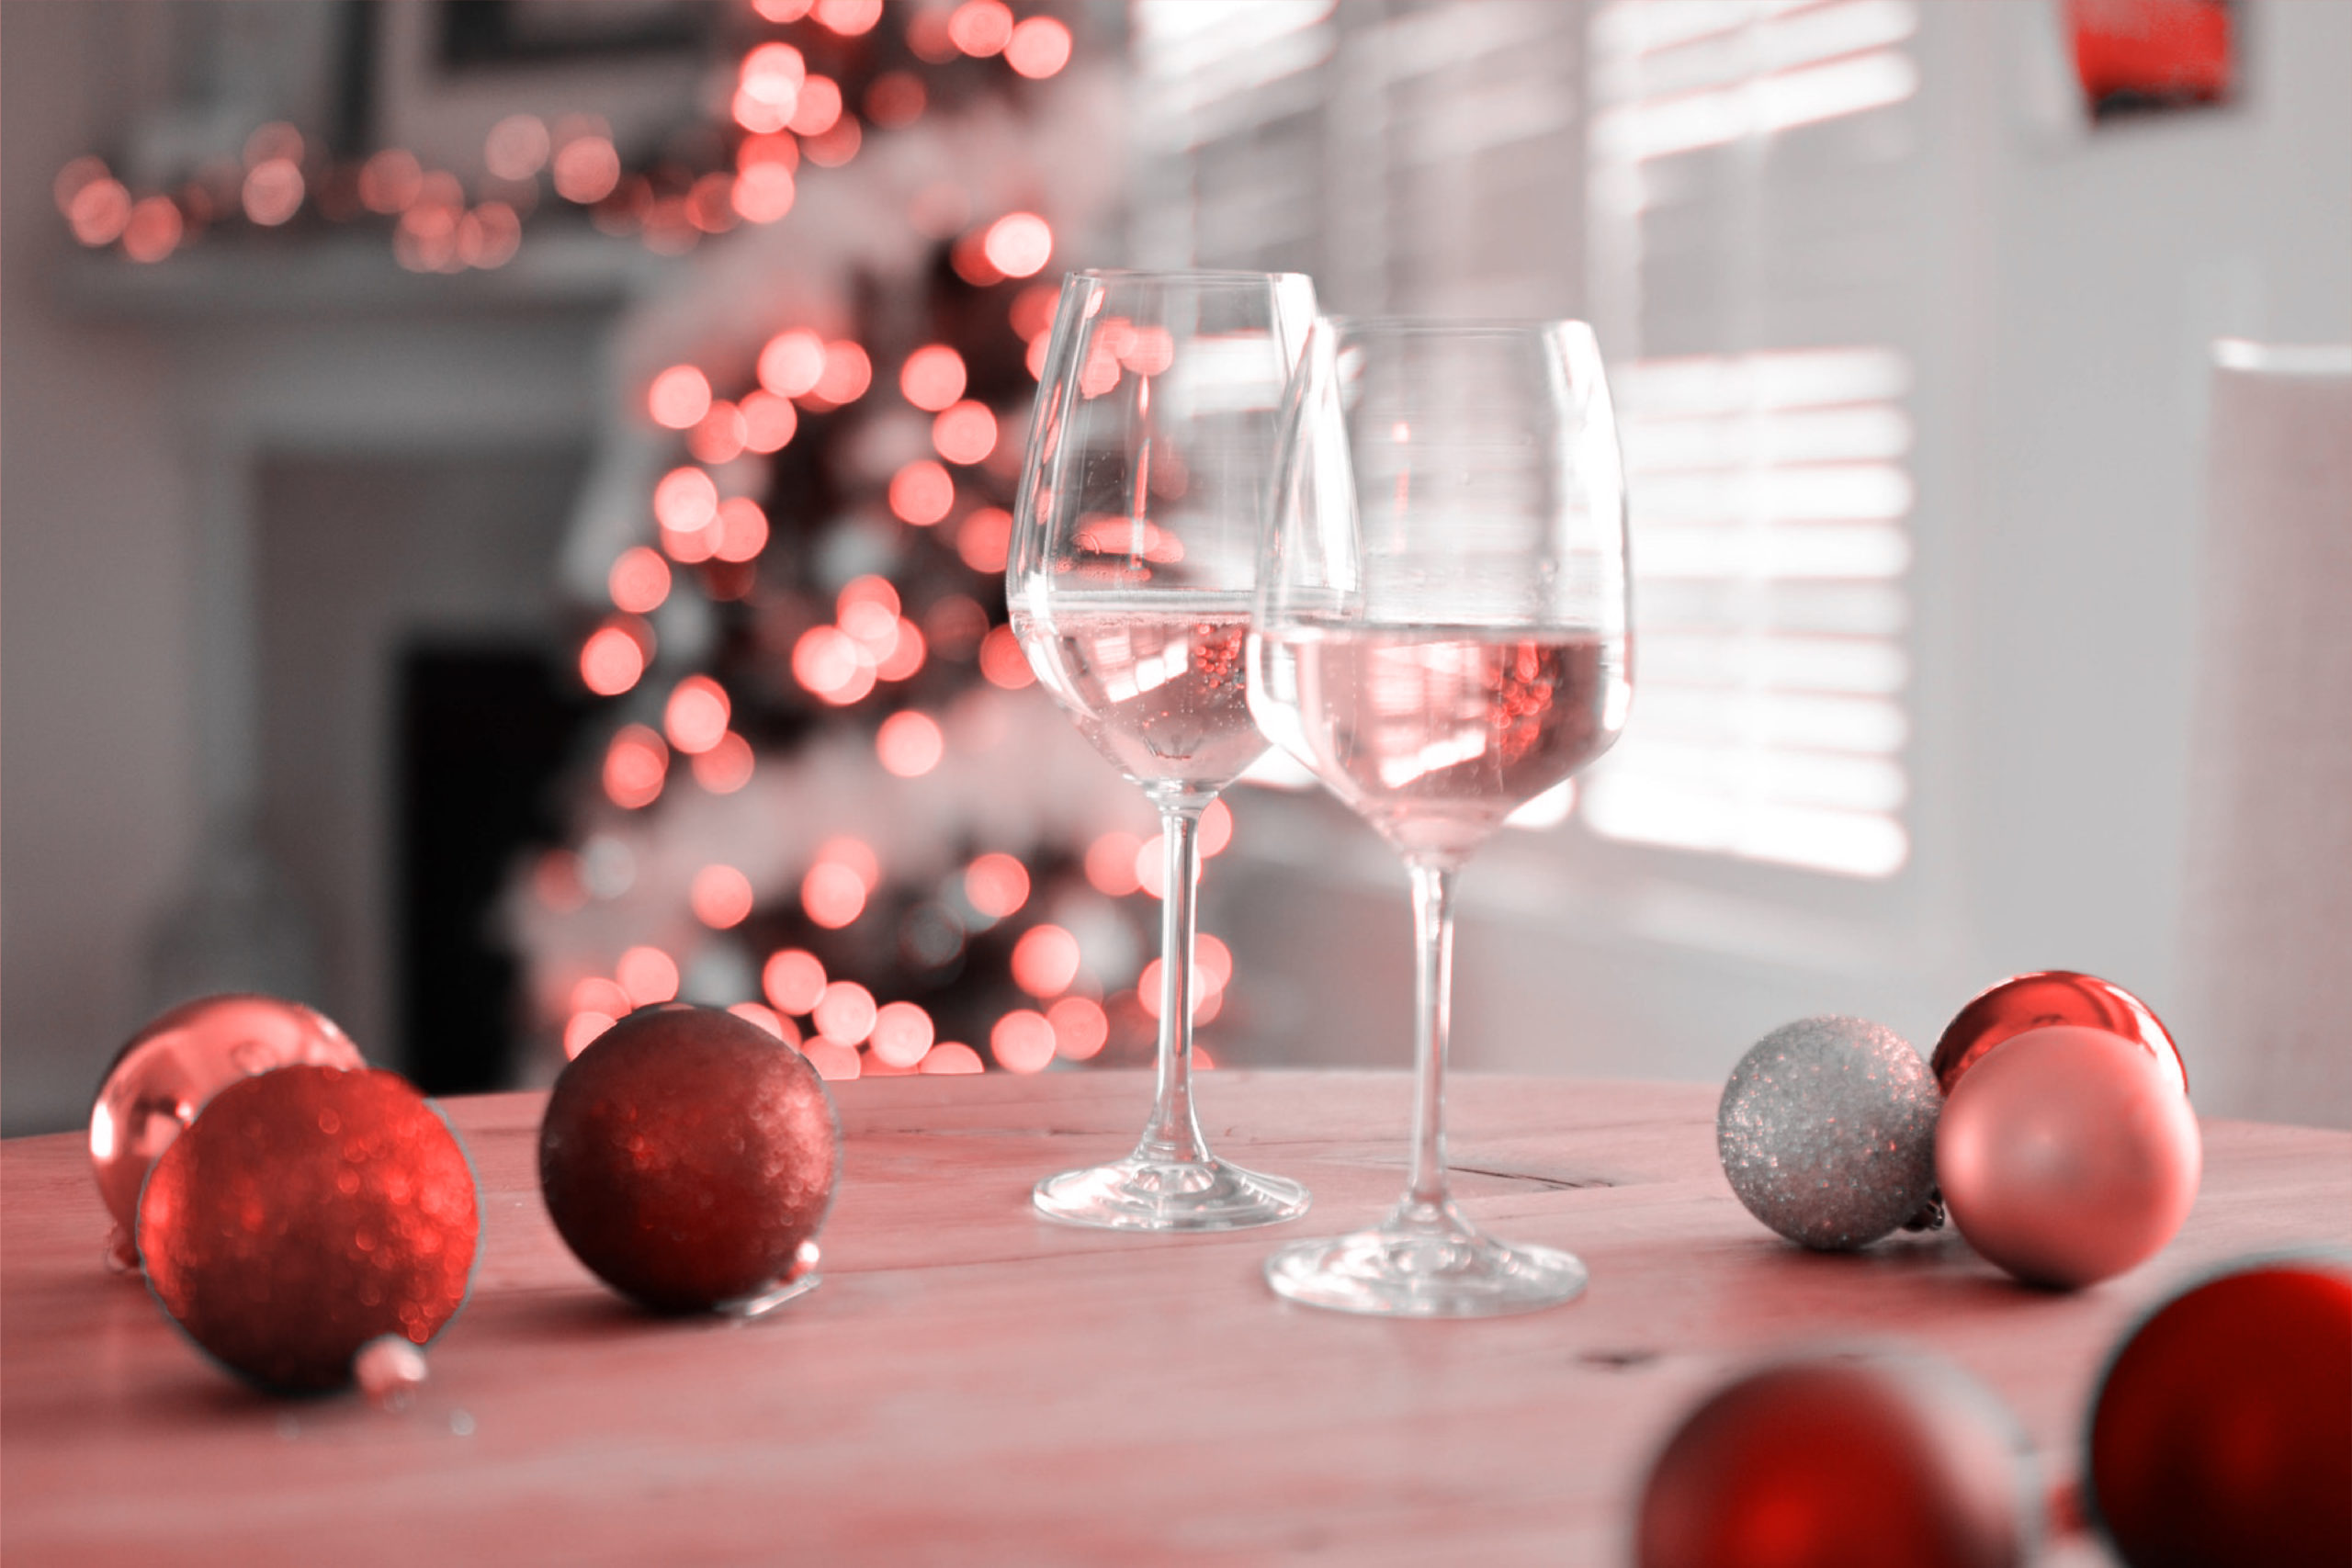 This is an image of two wine glasses on a tables surrounded by Christmas decorations.